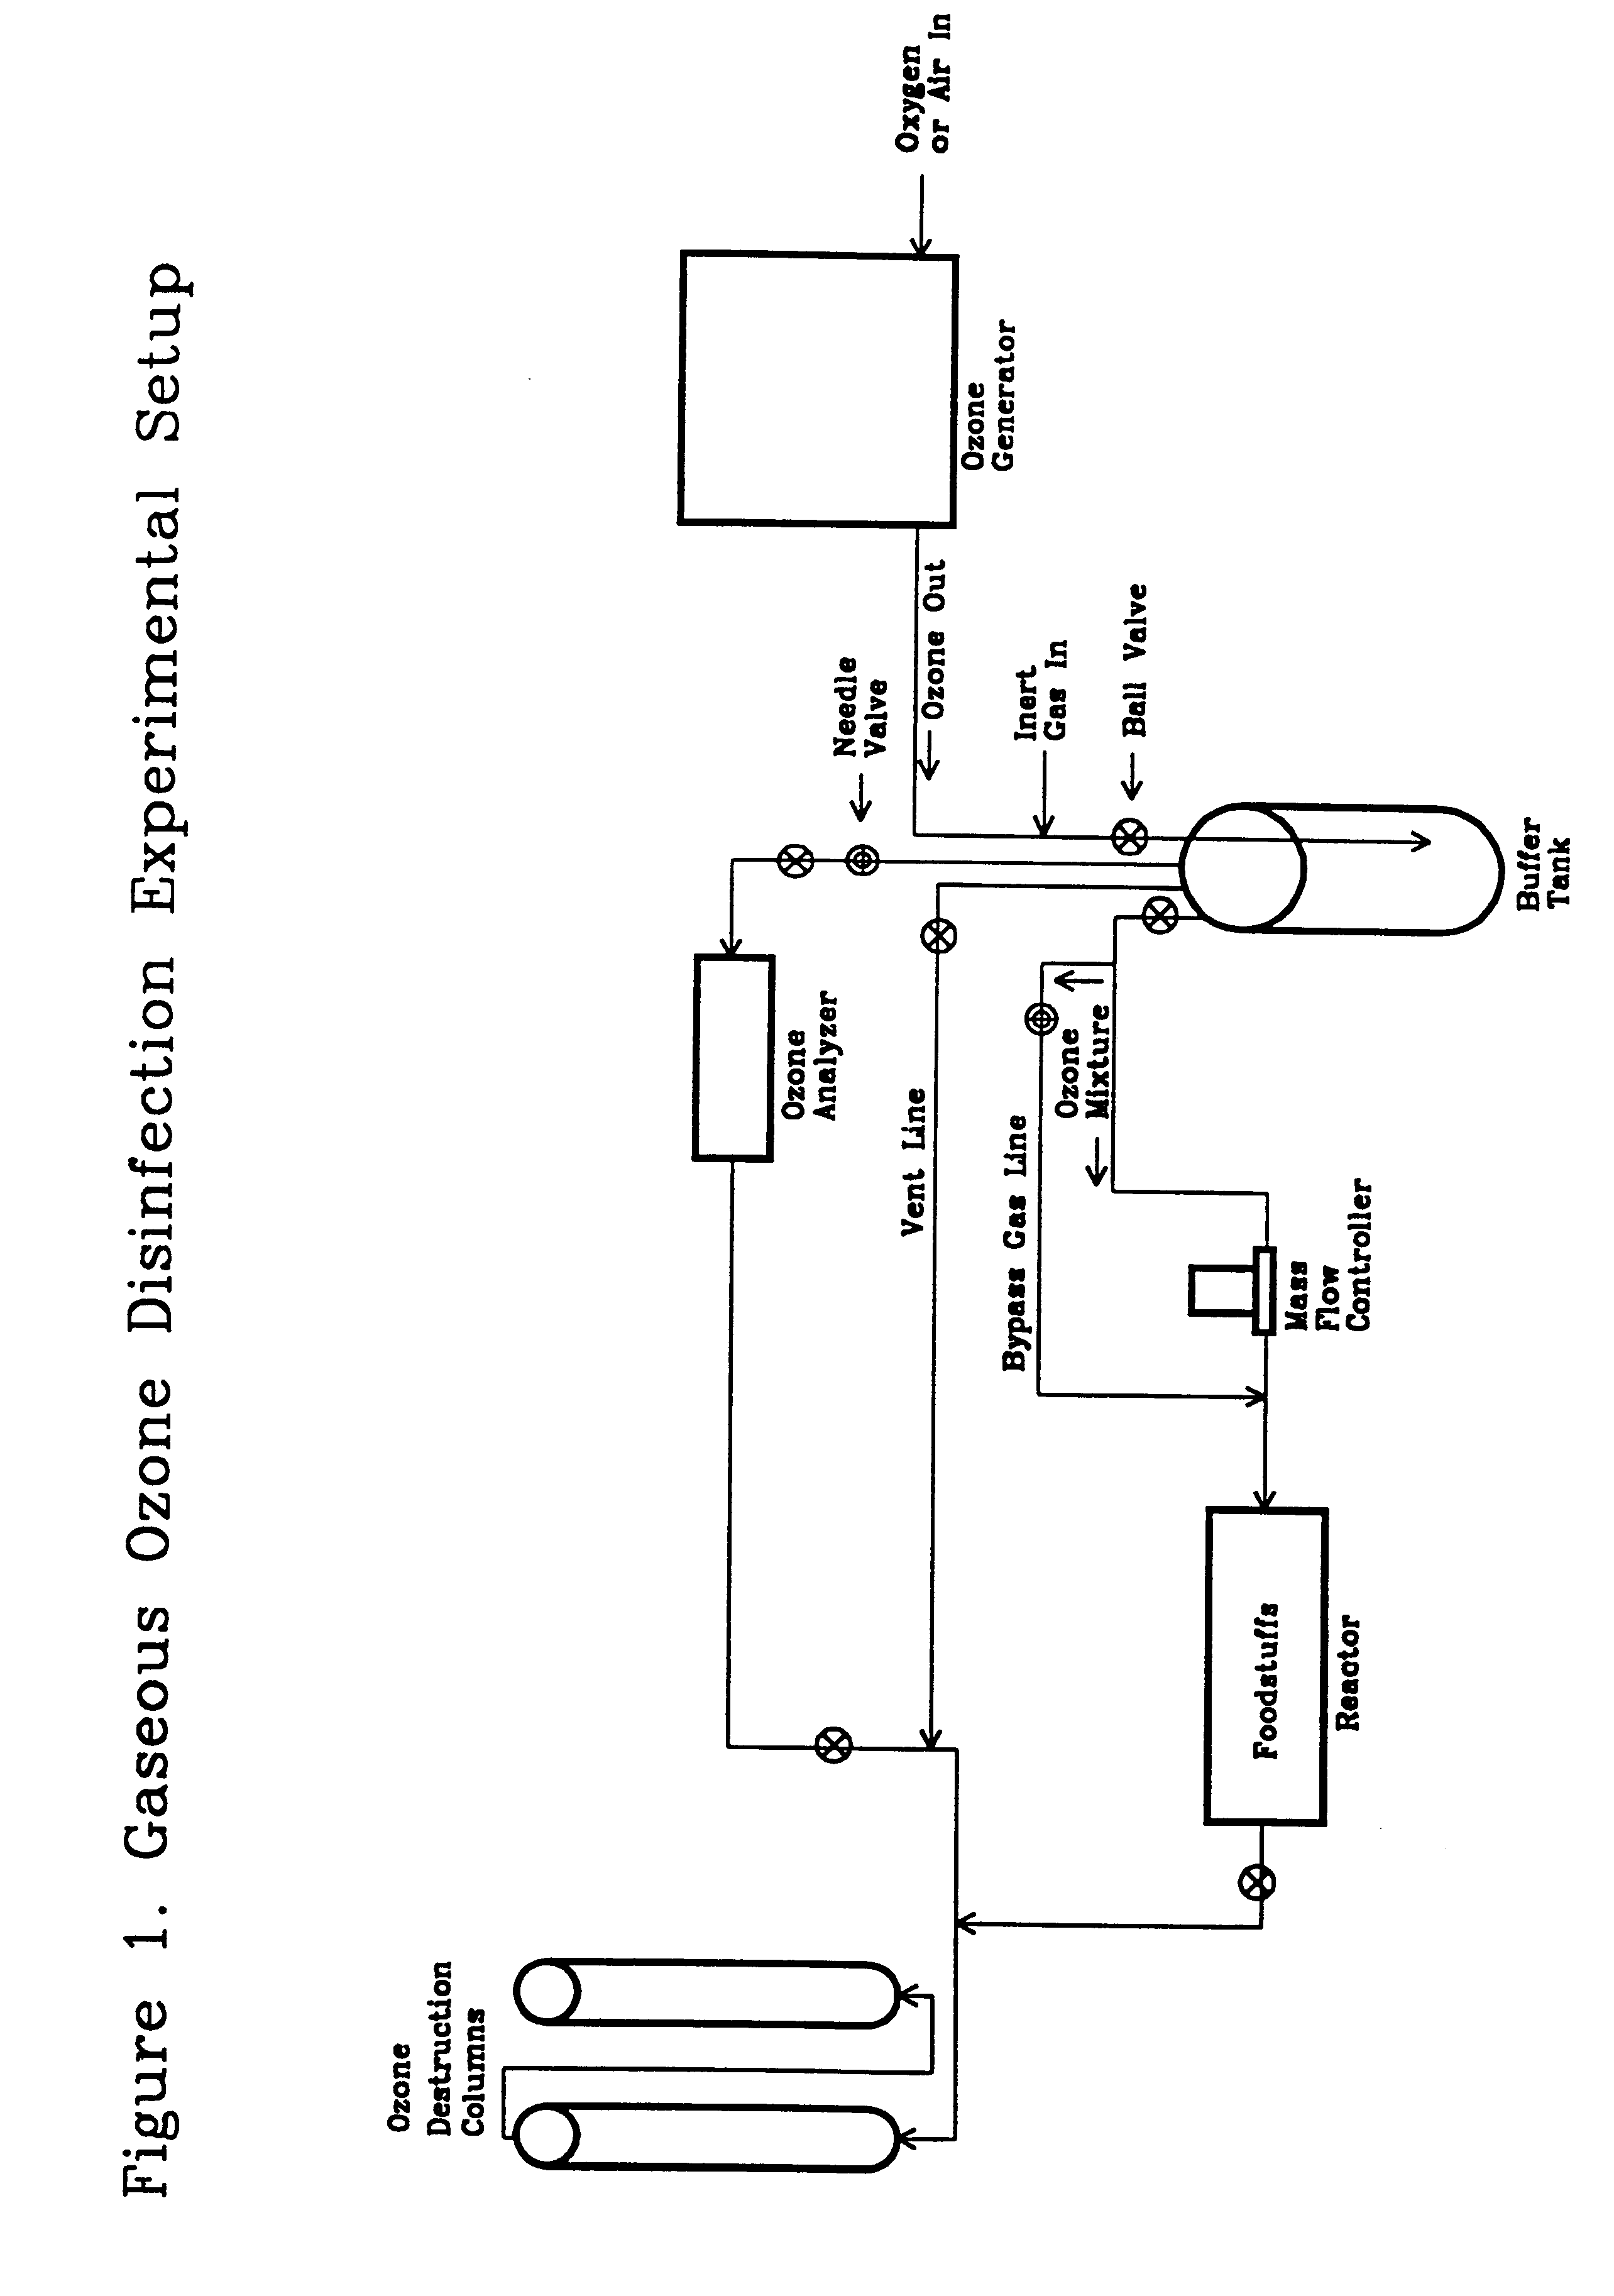 Method of disinfecting a foodstuff using gaseous ozone